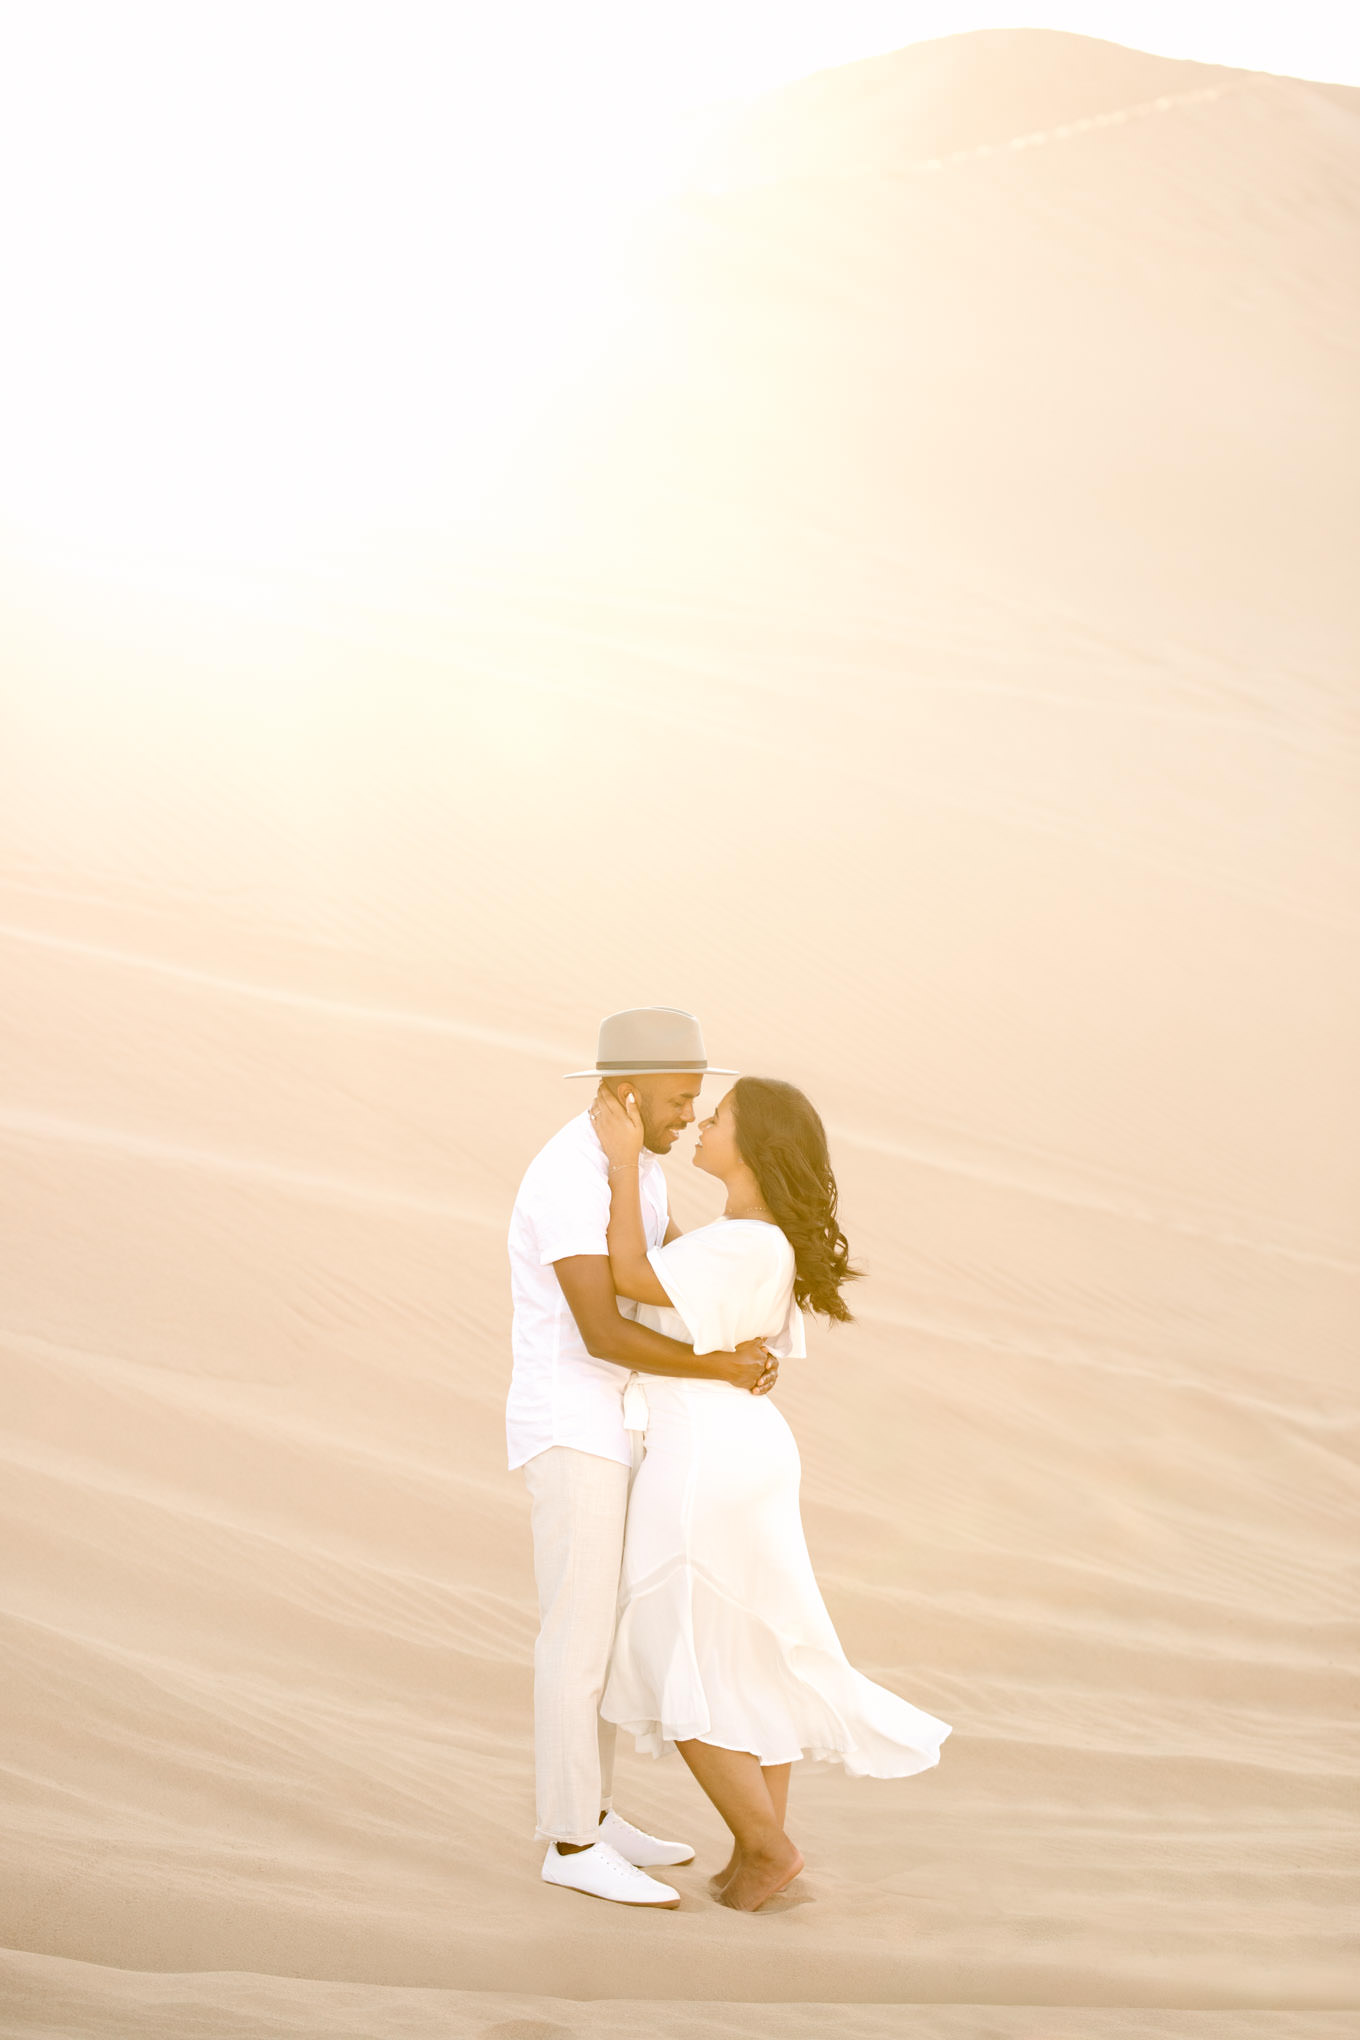 All white outfits at Glamis Sand Dunes engagement session | Engagement, elopement, and wedding photography roundup of Mary Costa’s favorite images from 2020 | Colorful and elevated photography for fun-loving couples in Southern California | #2020wedding #elopement #weddingphoto #weddingphotography #microwedding   Source: Mary Costa Photography | Los Angeles